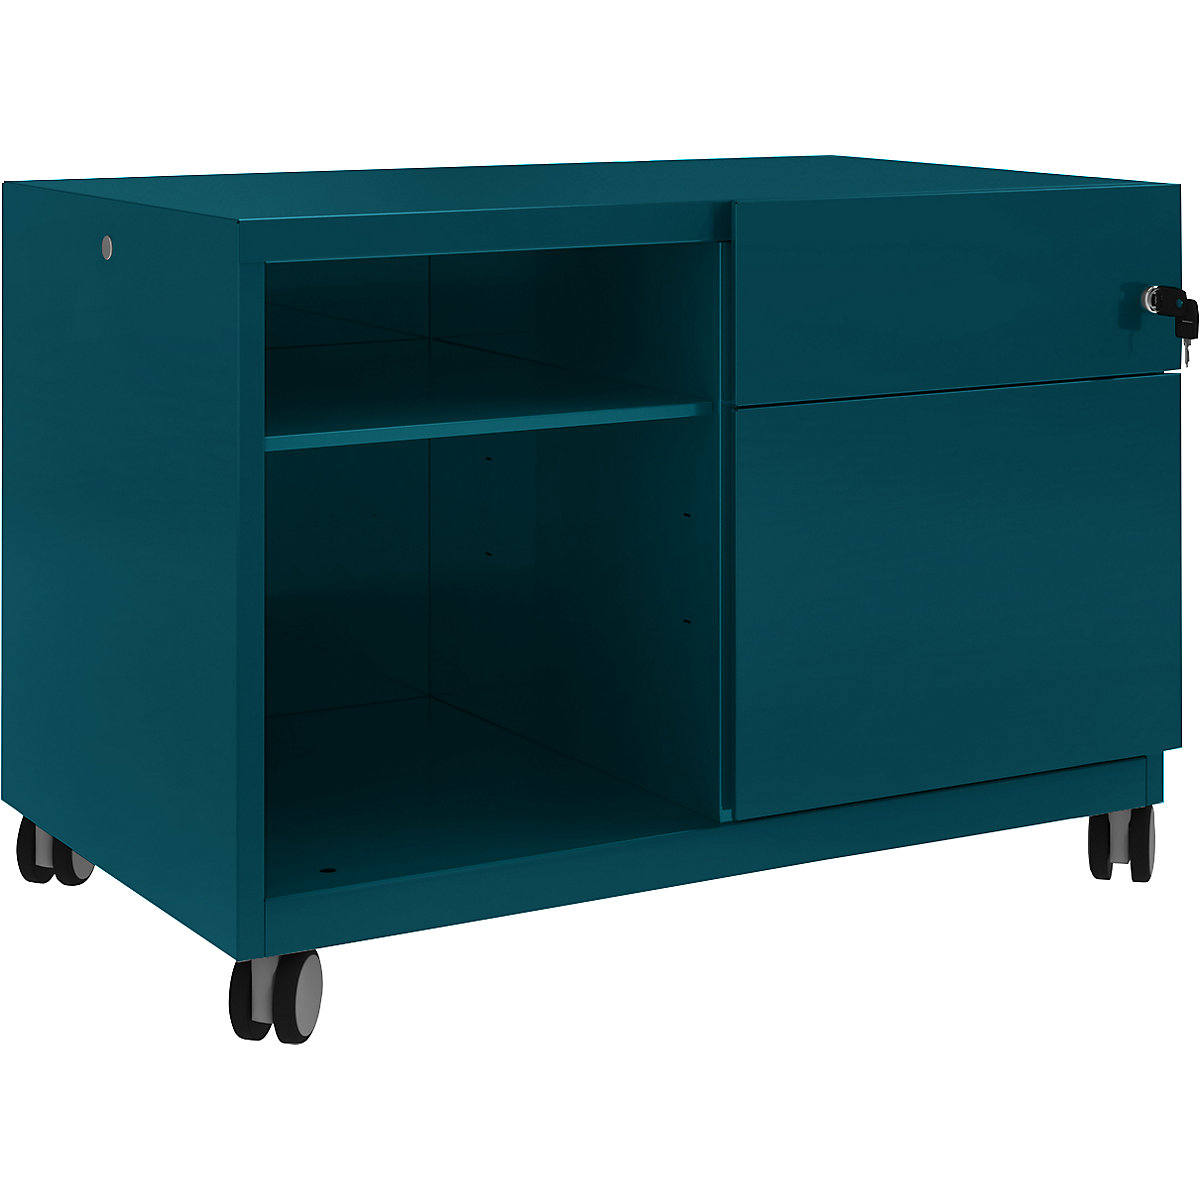 Note™ CADDY, HxBxT 563 x 800 x 490 mm – BISLEY, 1 universal drawer and suspension file drawer on the right, ocean blue-21